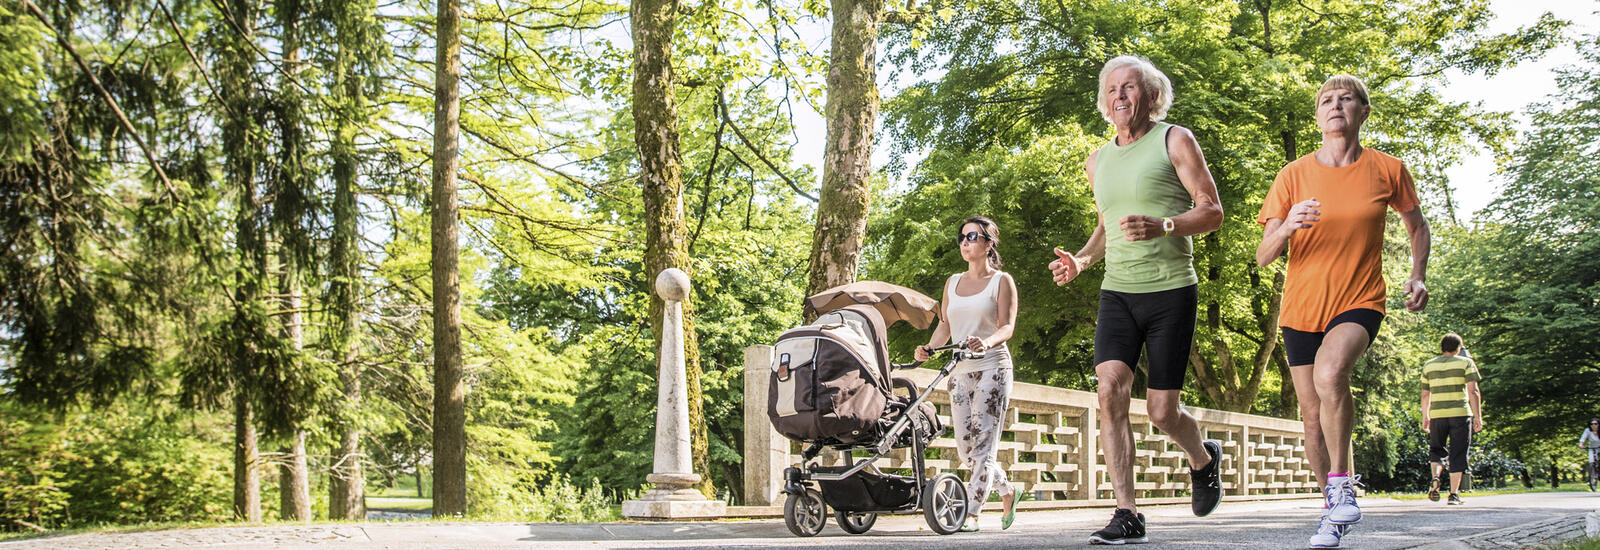 Two people jogging and one person walking with a stroller in tree-lined park.